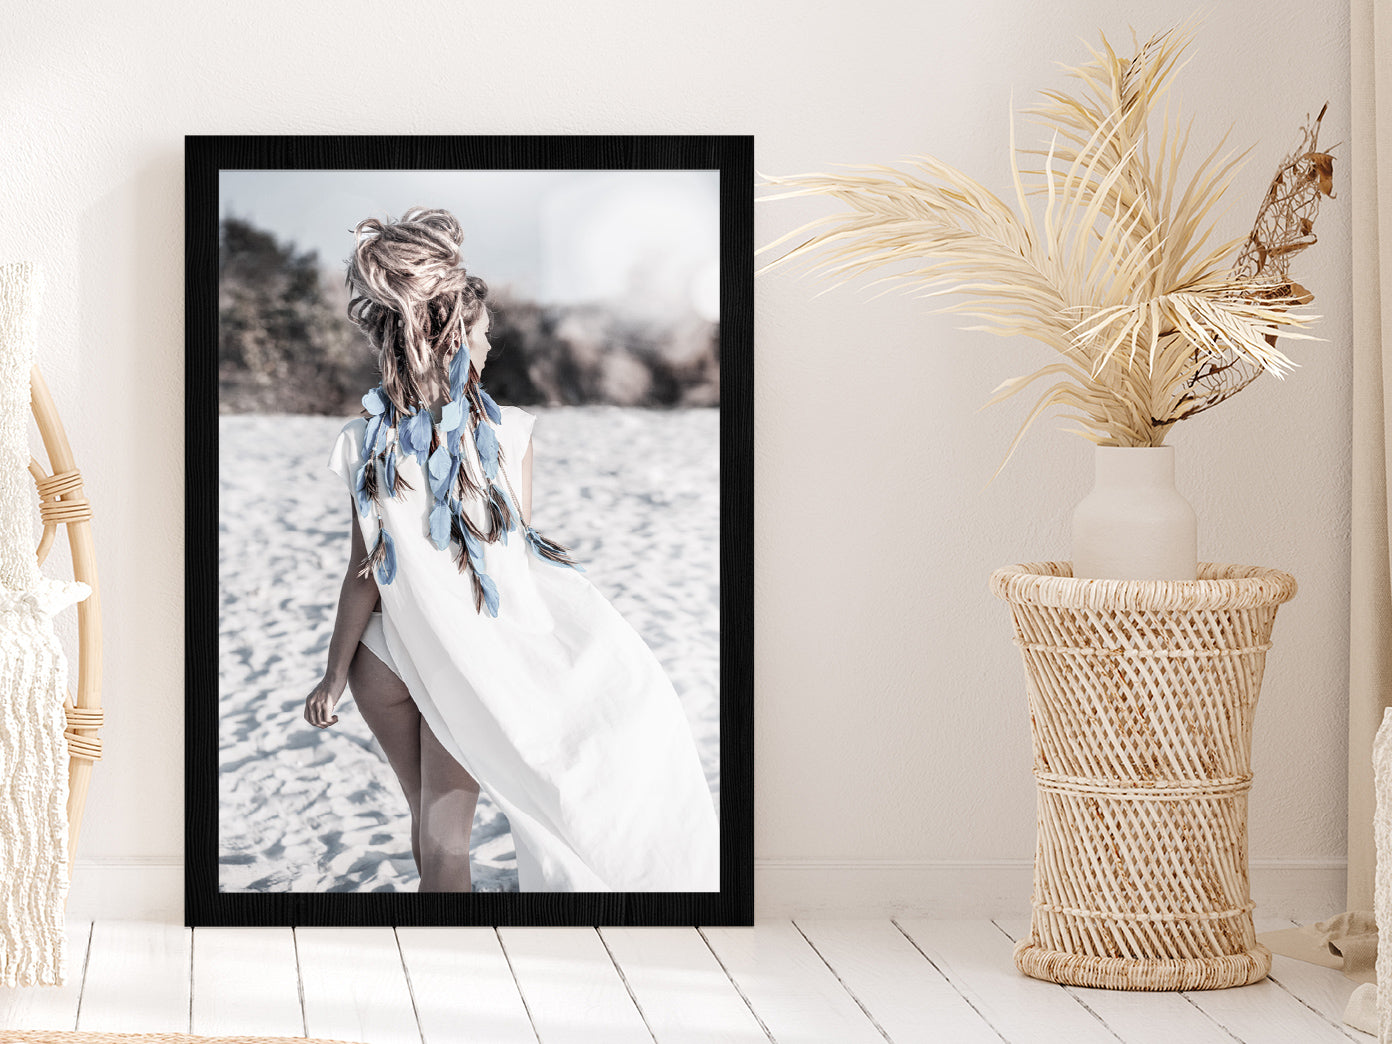 Girl on Sand Beach View Photograph Glass Framed Wall Art, Ready to Hang Quality Print Without White Border Black